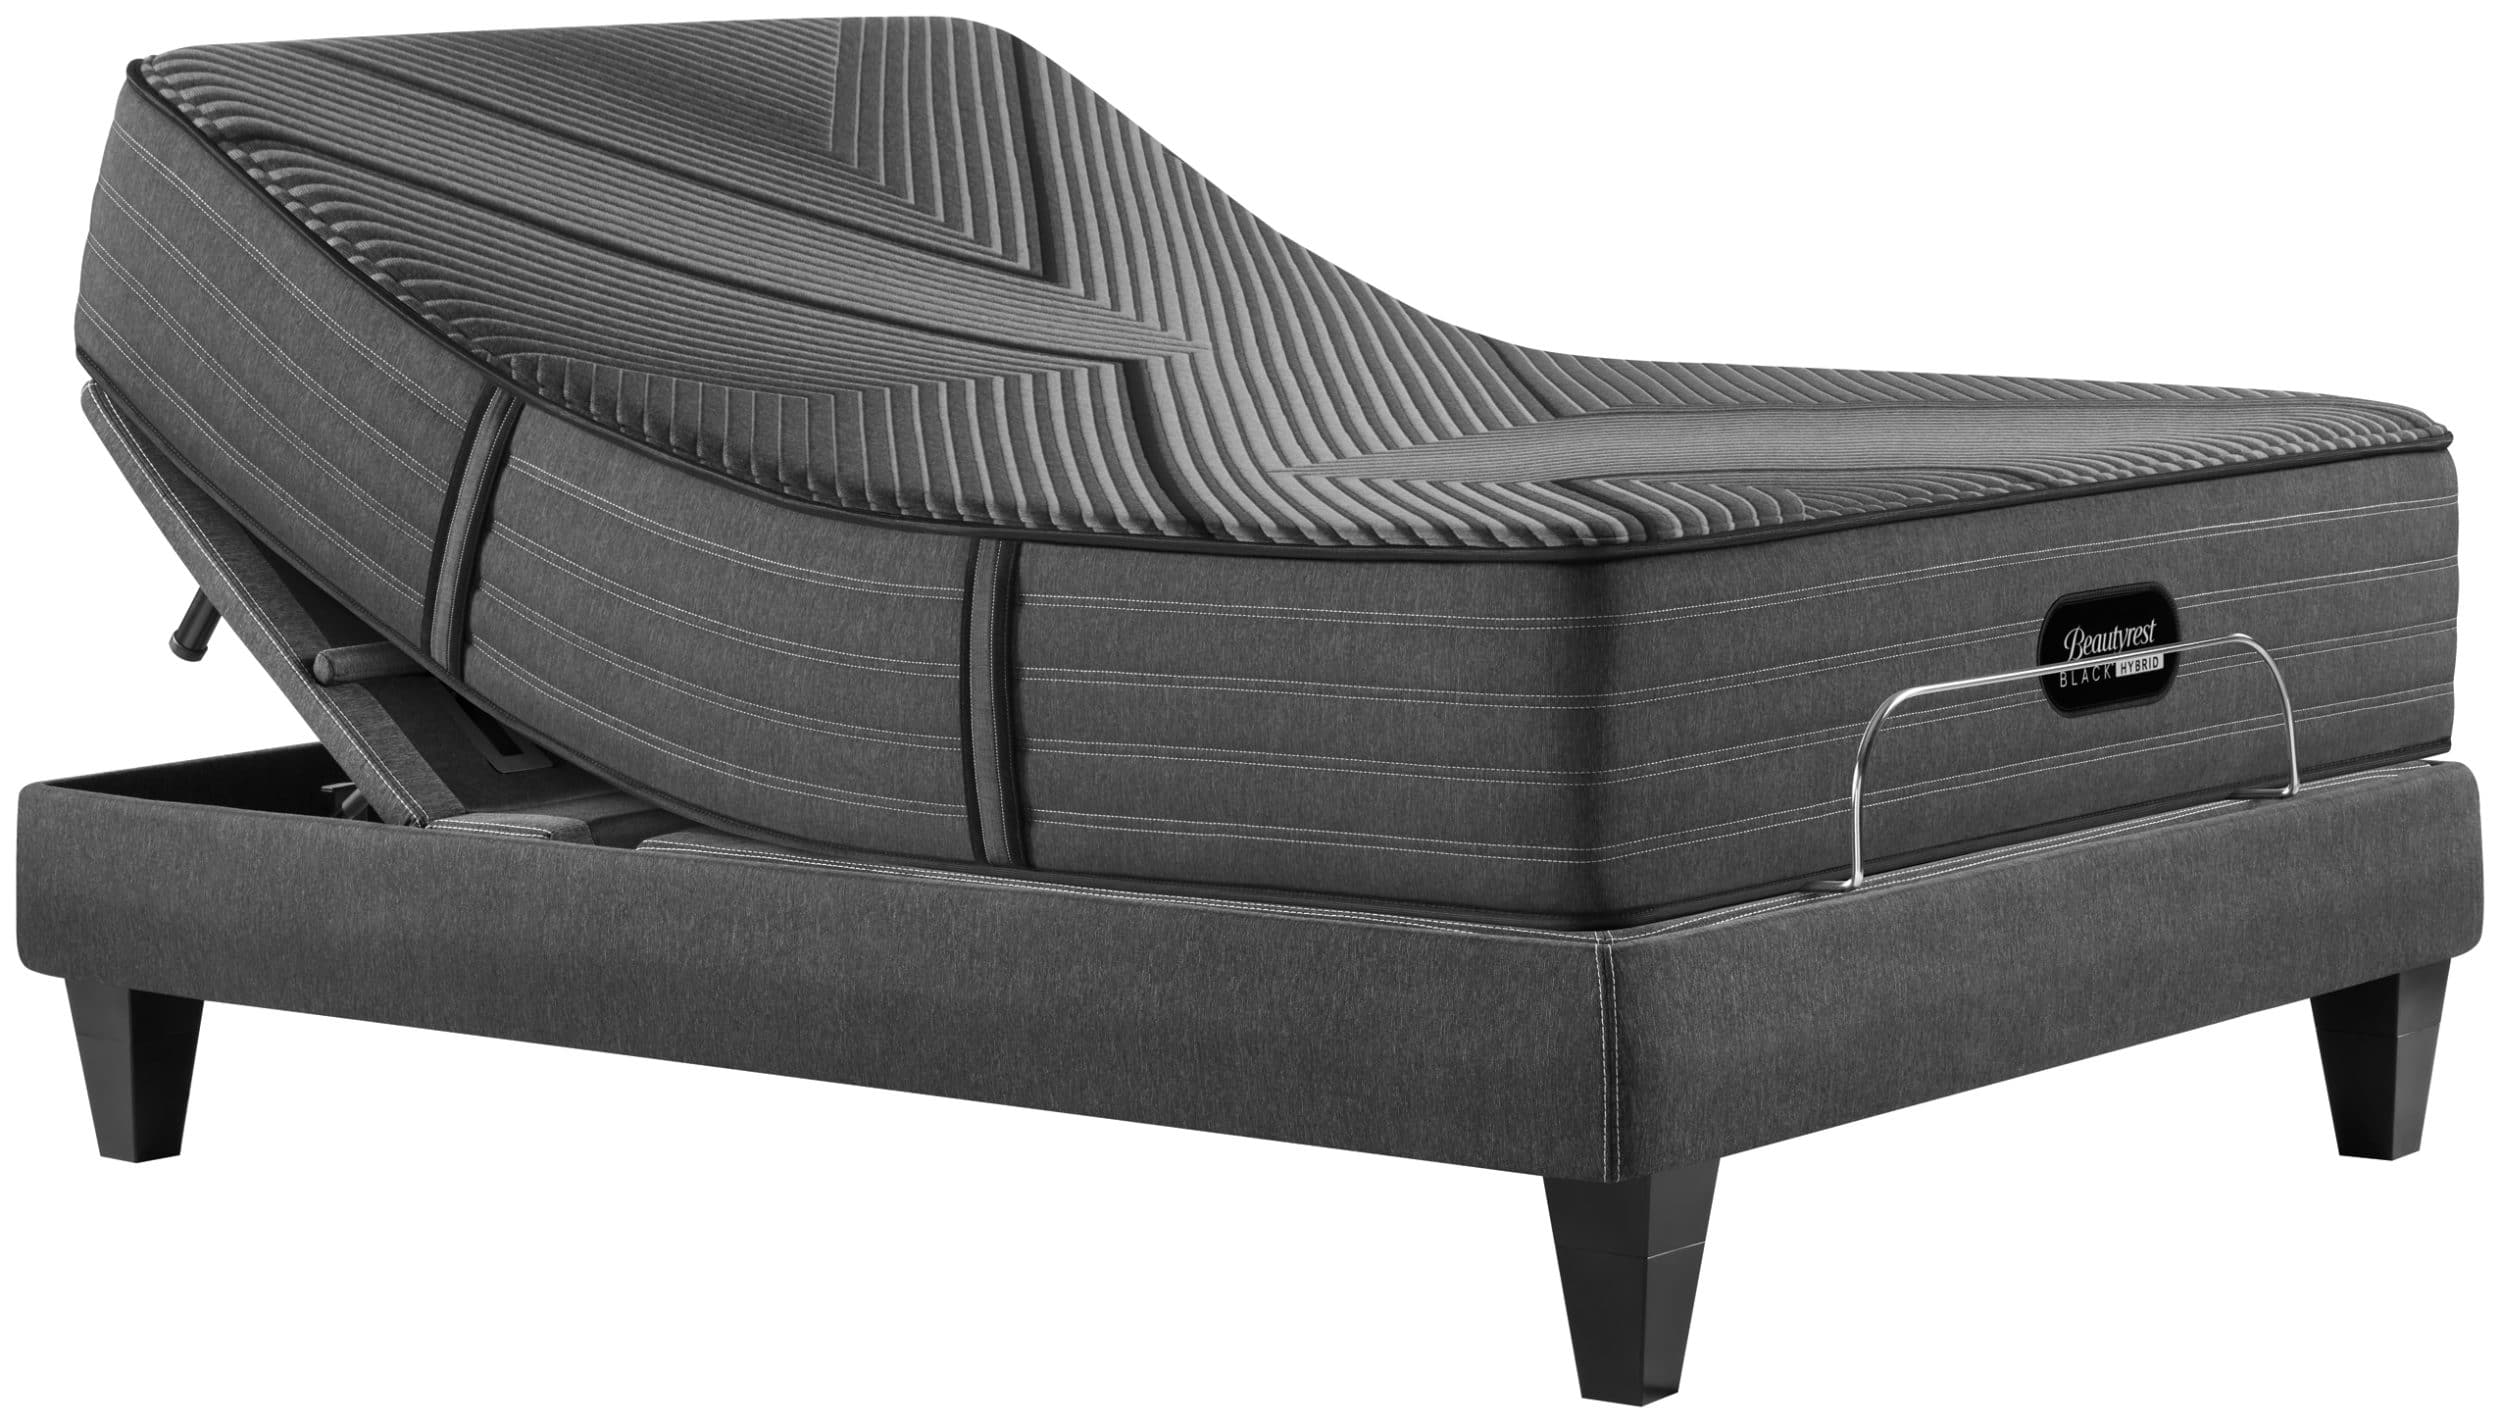 Photo of a black beautyrest adjustable bed